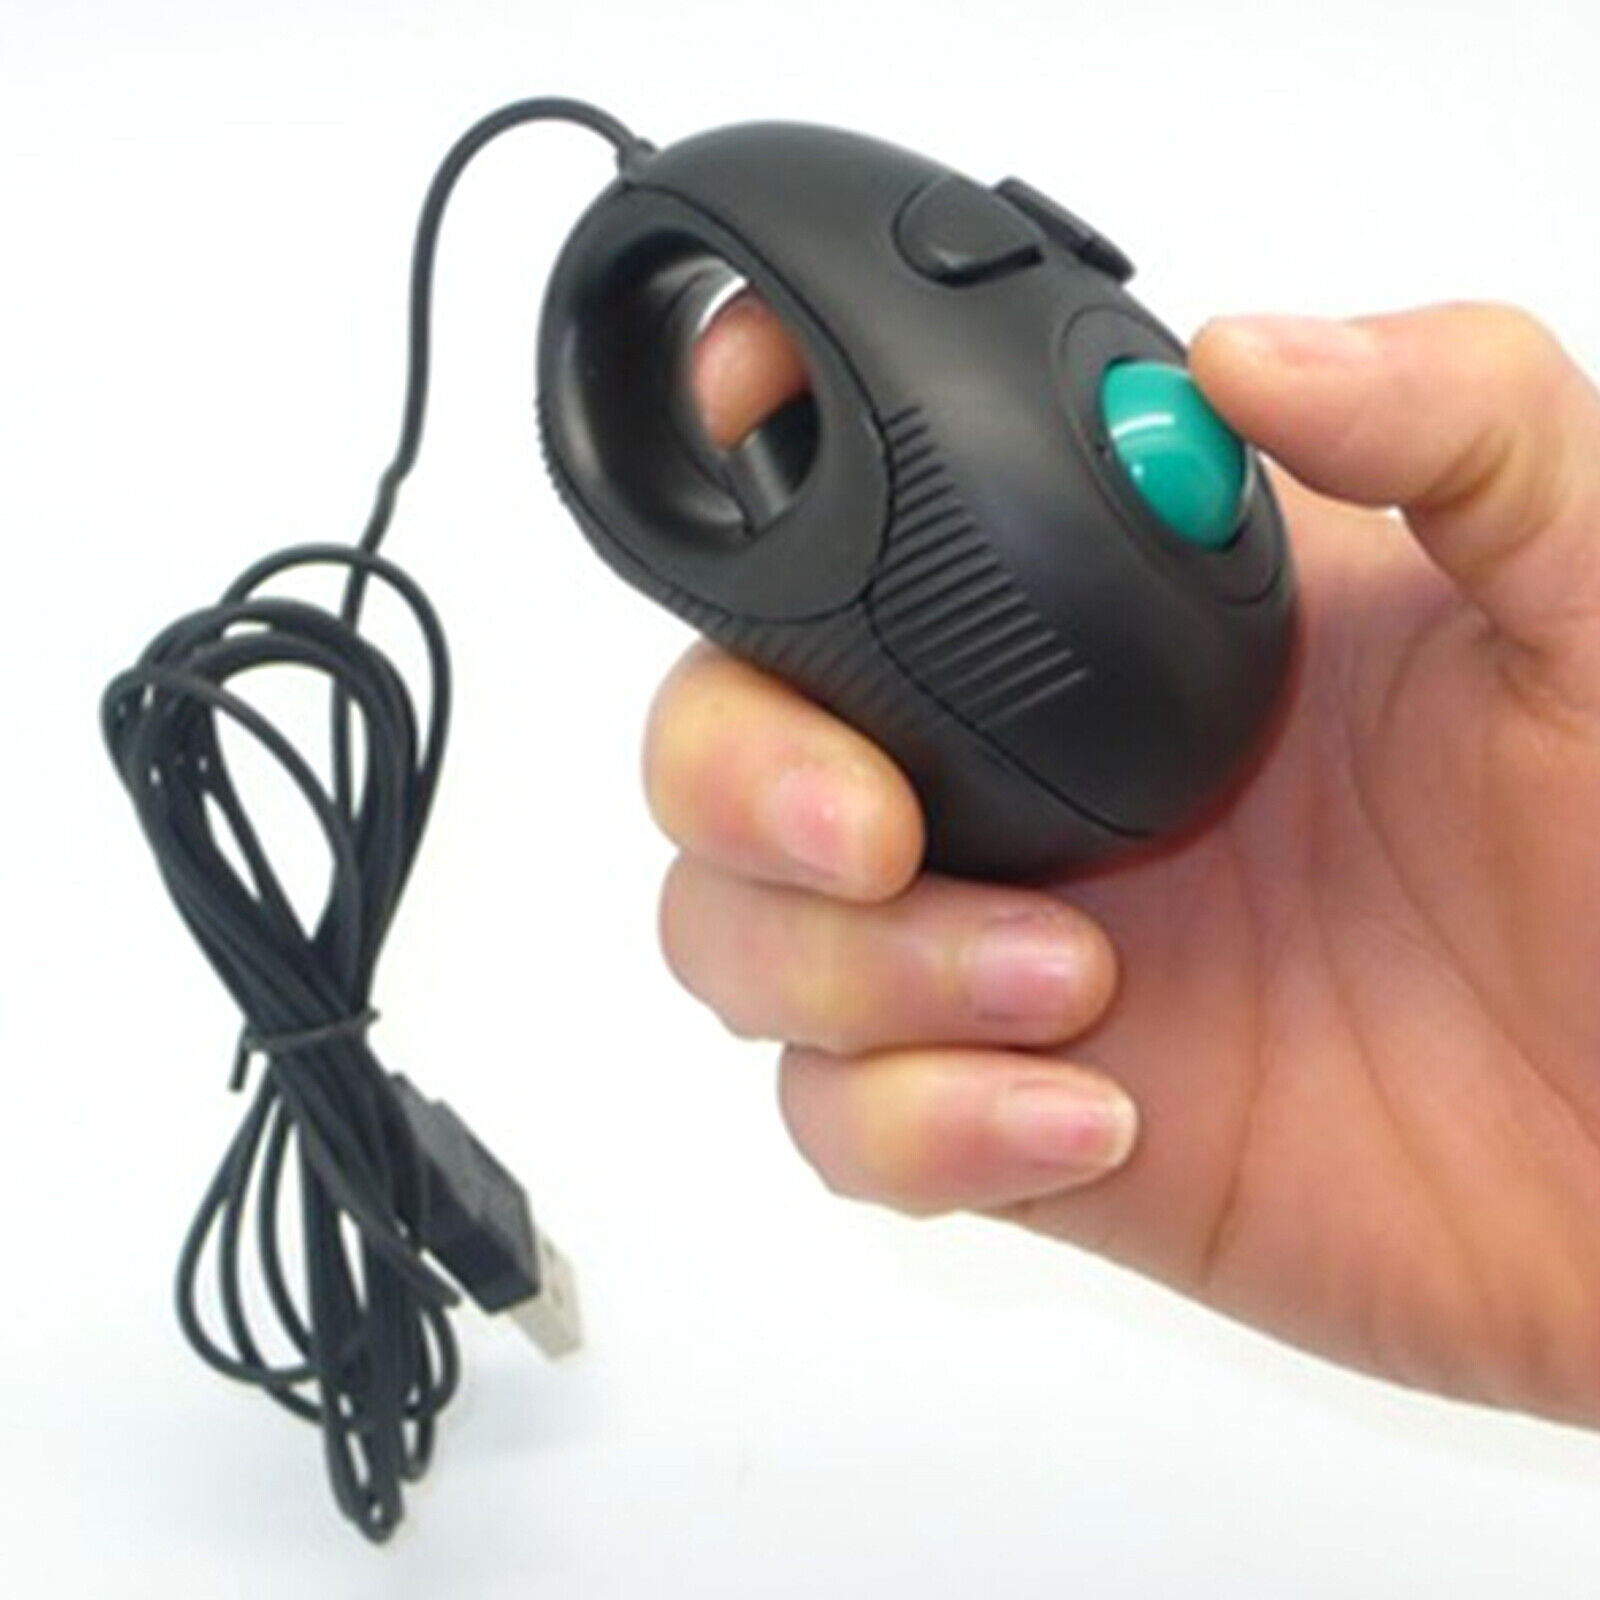 USB Wired Trackball Mouse Portable PC Laptop Finger Hand Held Computer Mice kOXu